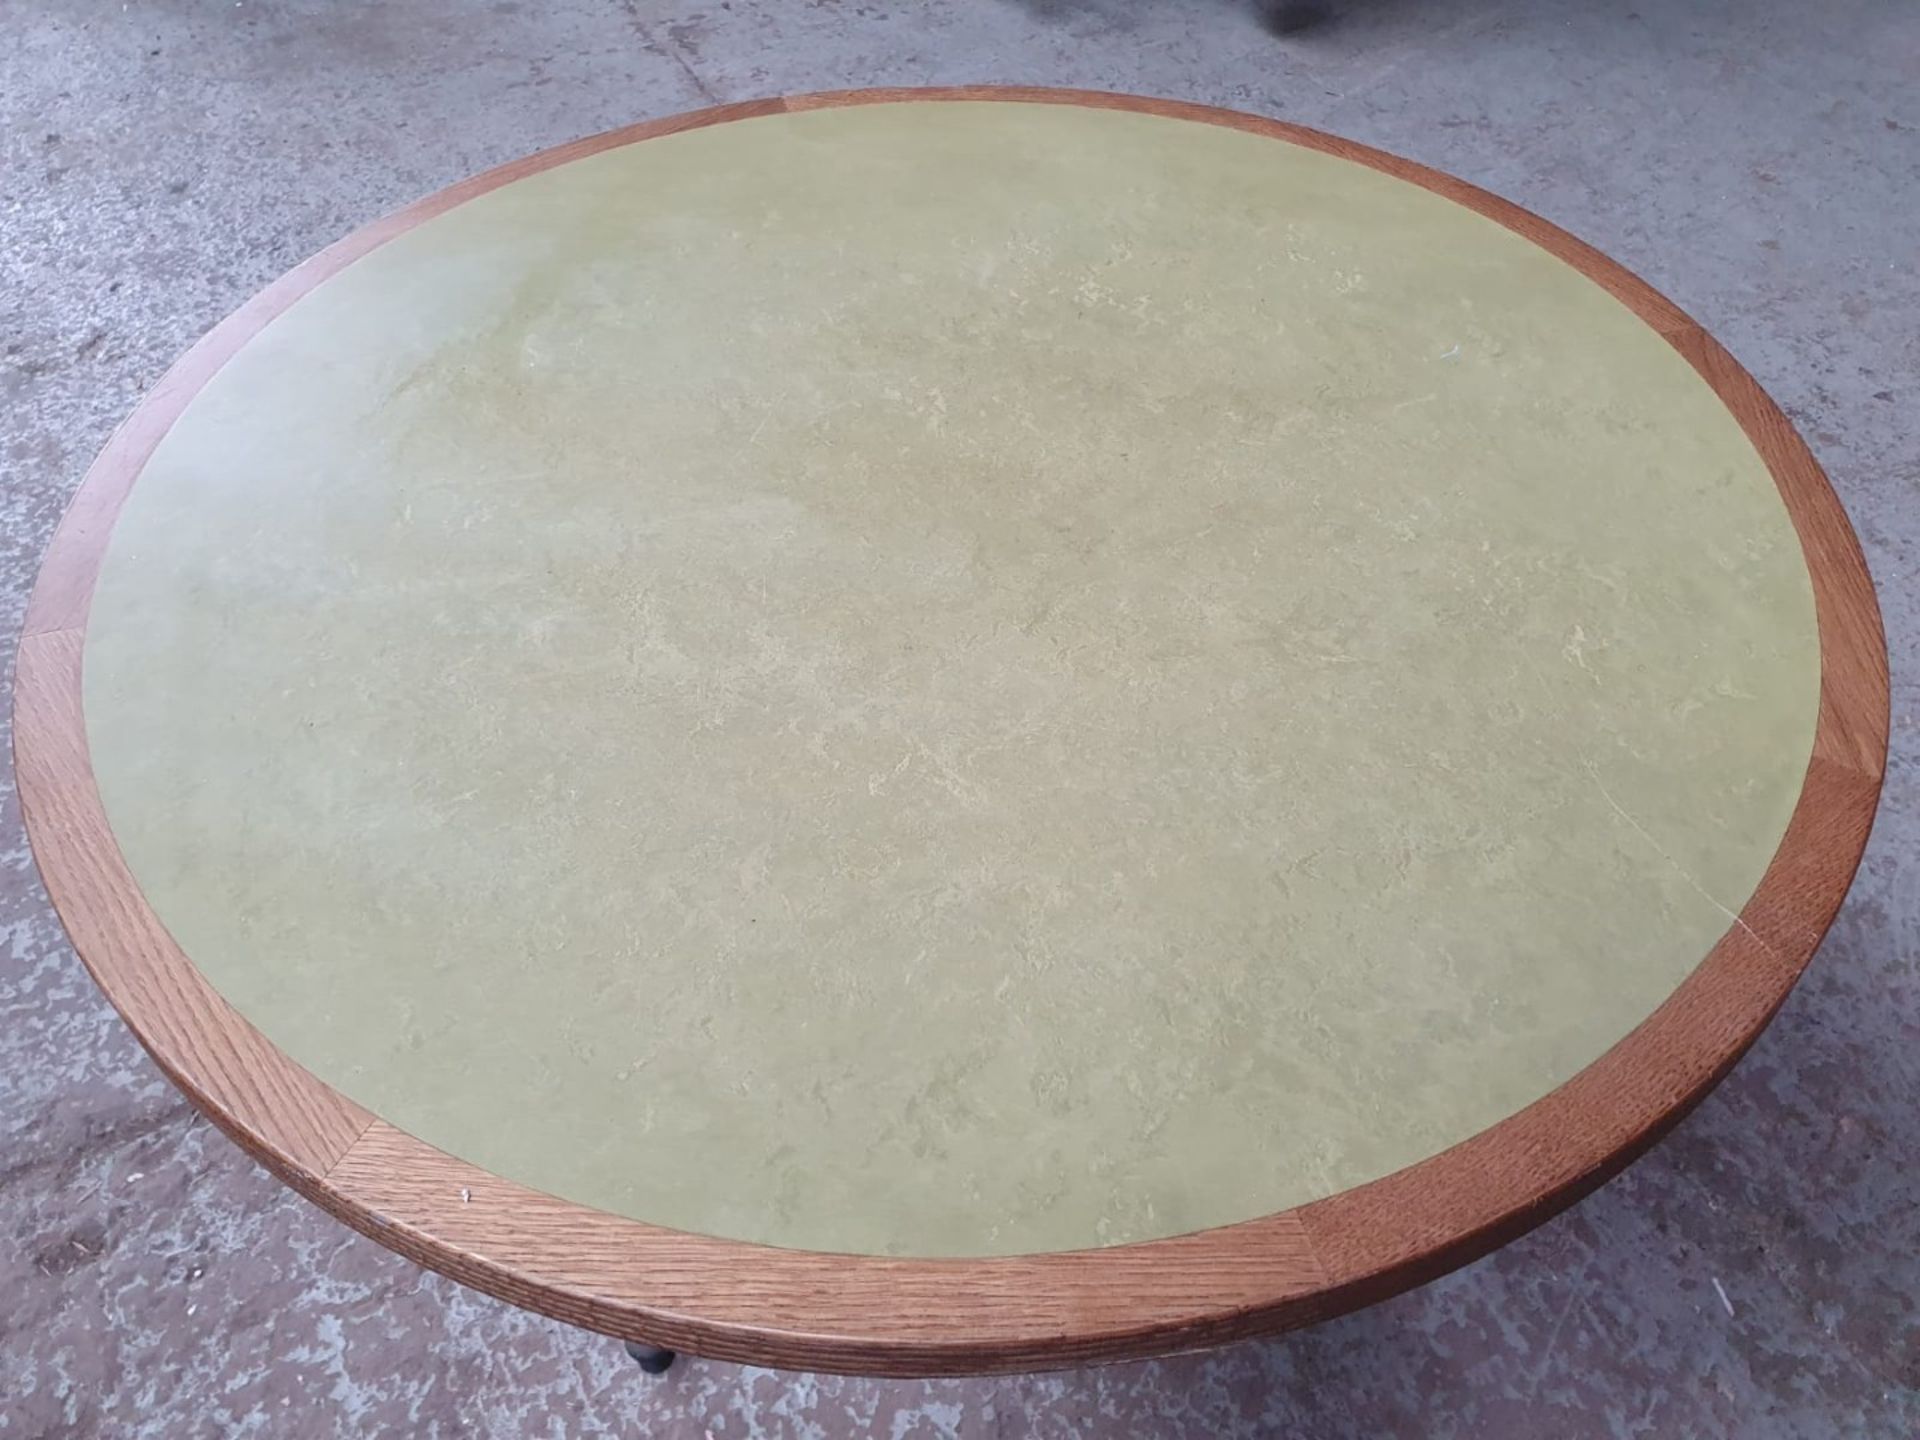 2 x Large Round Bistro Restaurant Tables With Green Faux Leather Inserts And Three-Legged Bases - Image 3 of 4